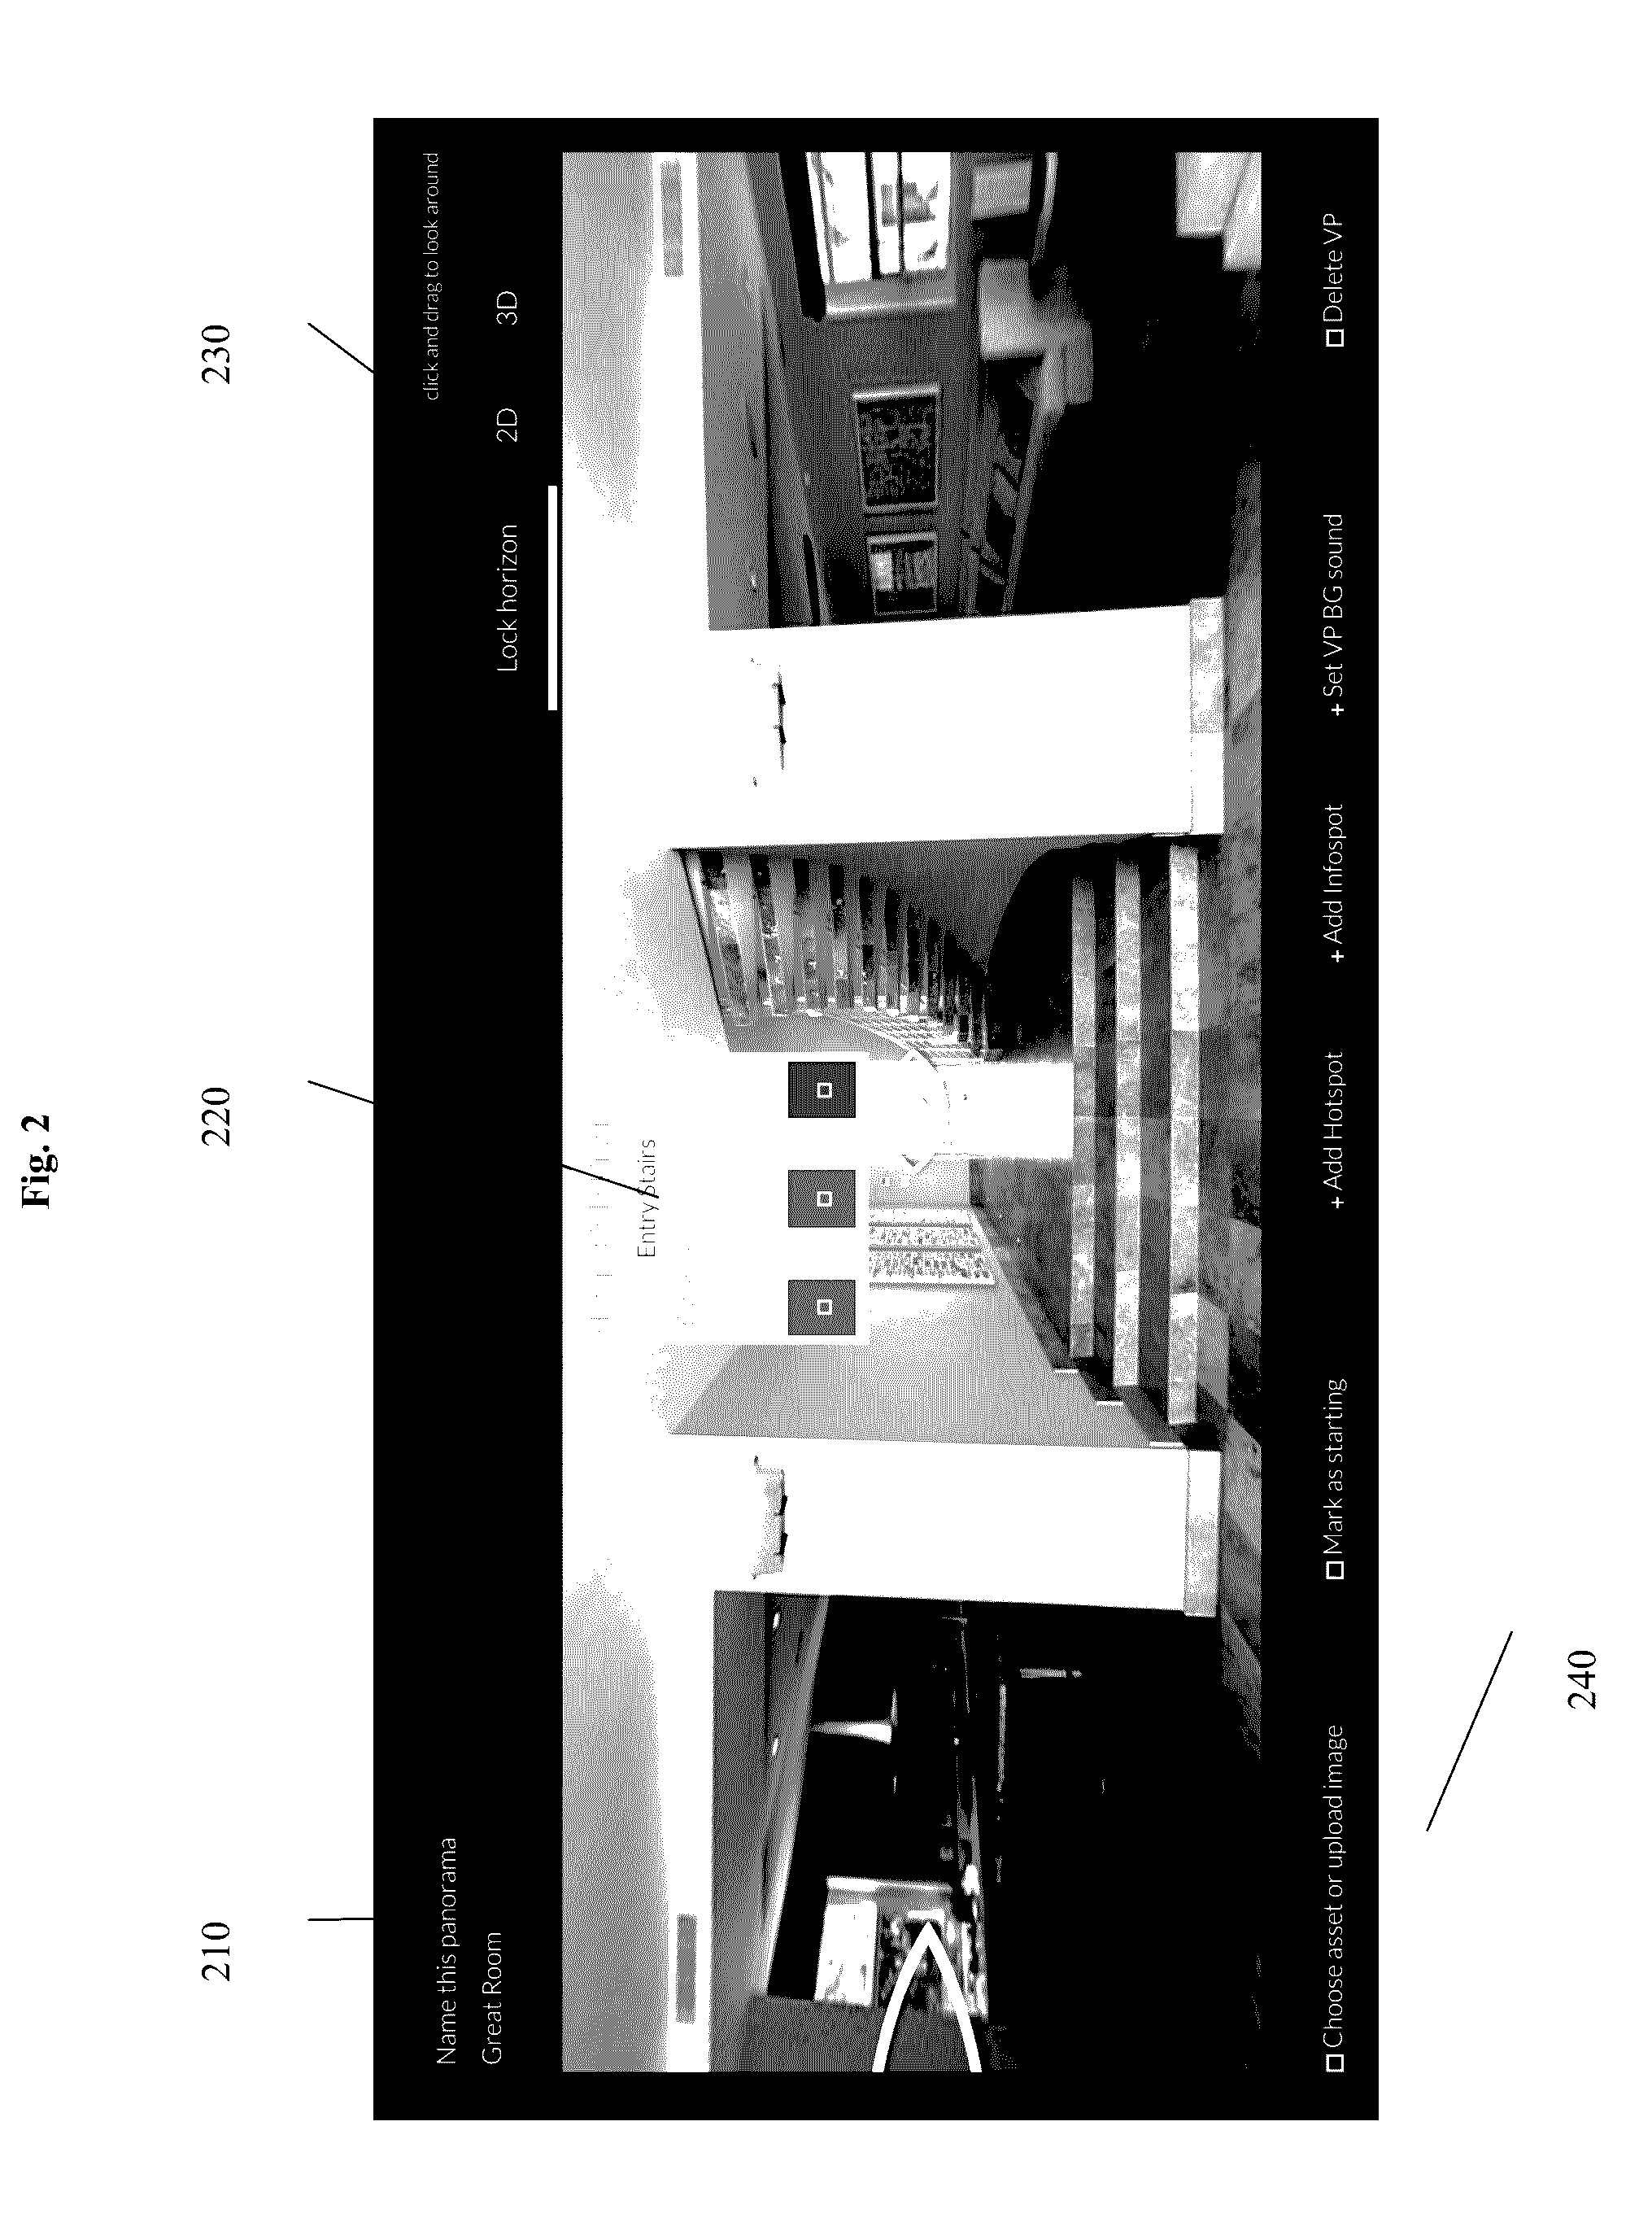 Systems, media, and methods for providing improved virtual reality tours and associated analytics